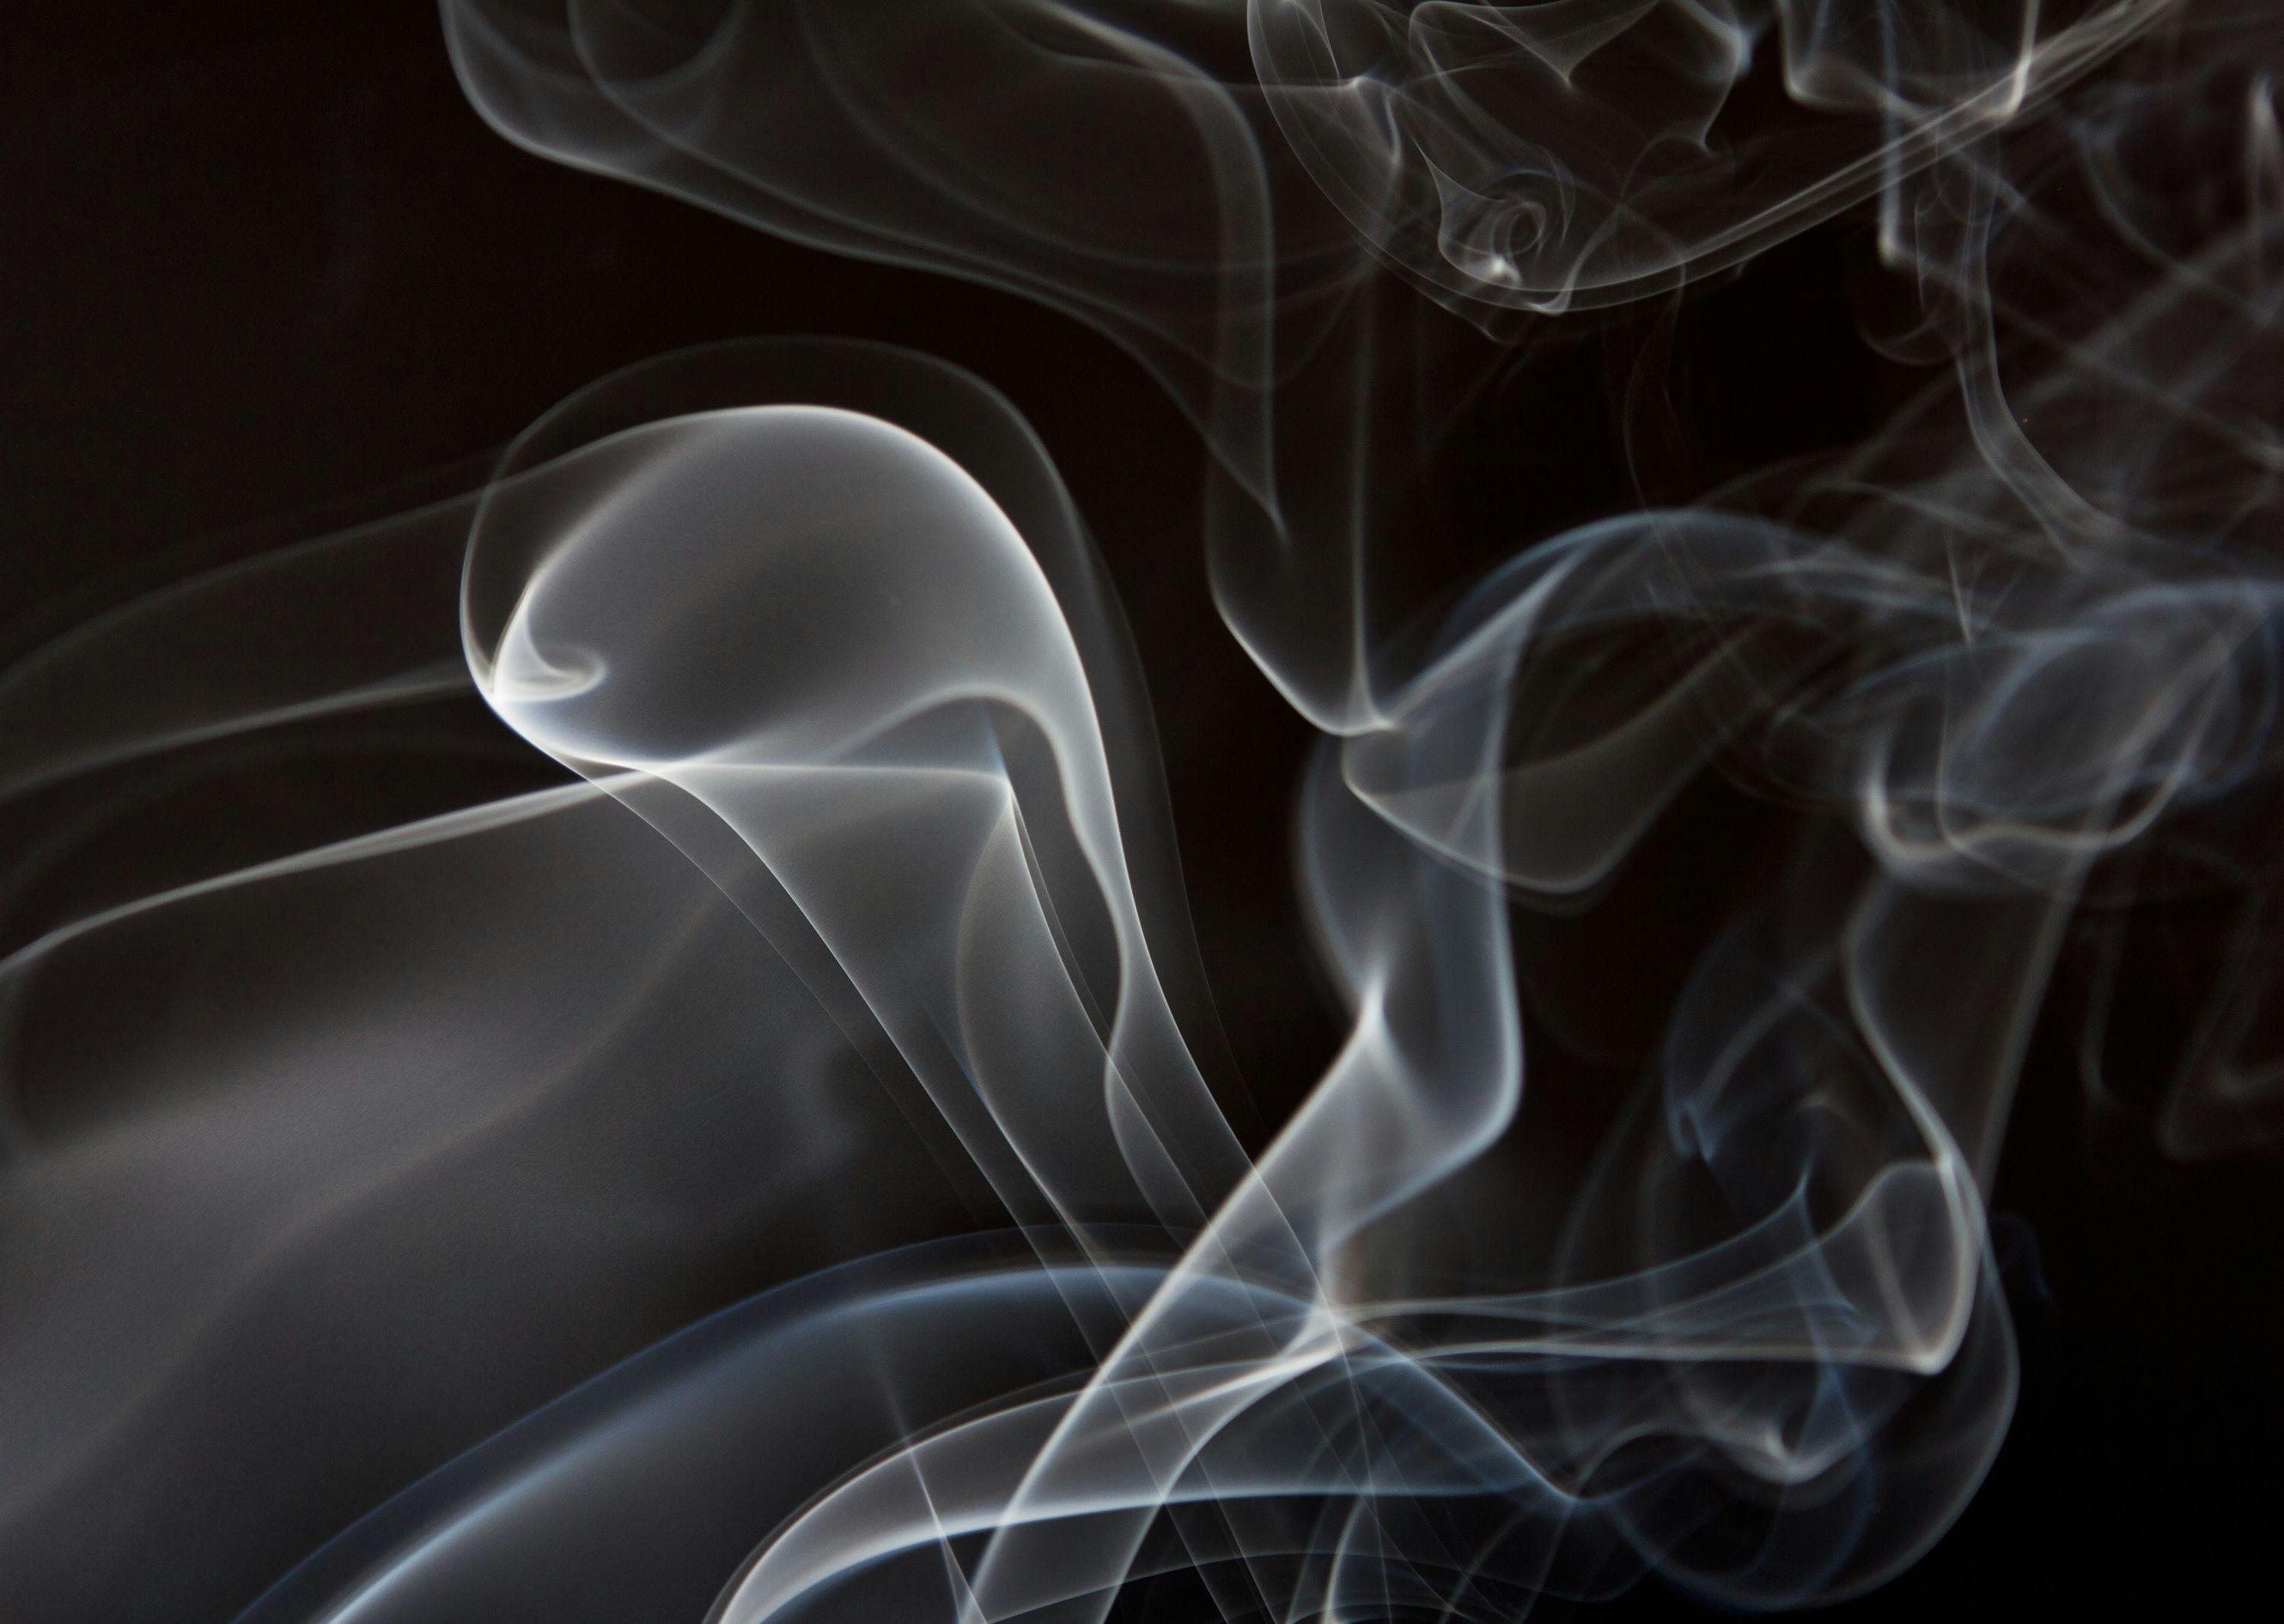 A Shift in the Air: Changes in Young Adults’ Vaping and Substance Use During COVID-19